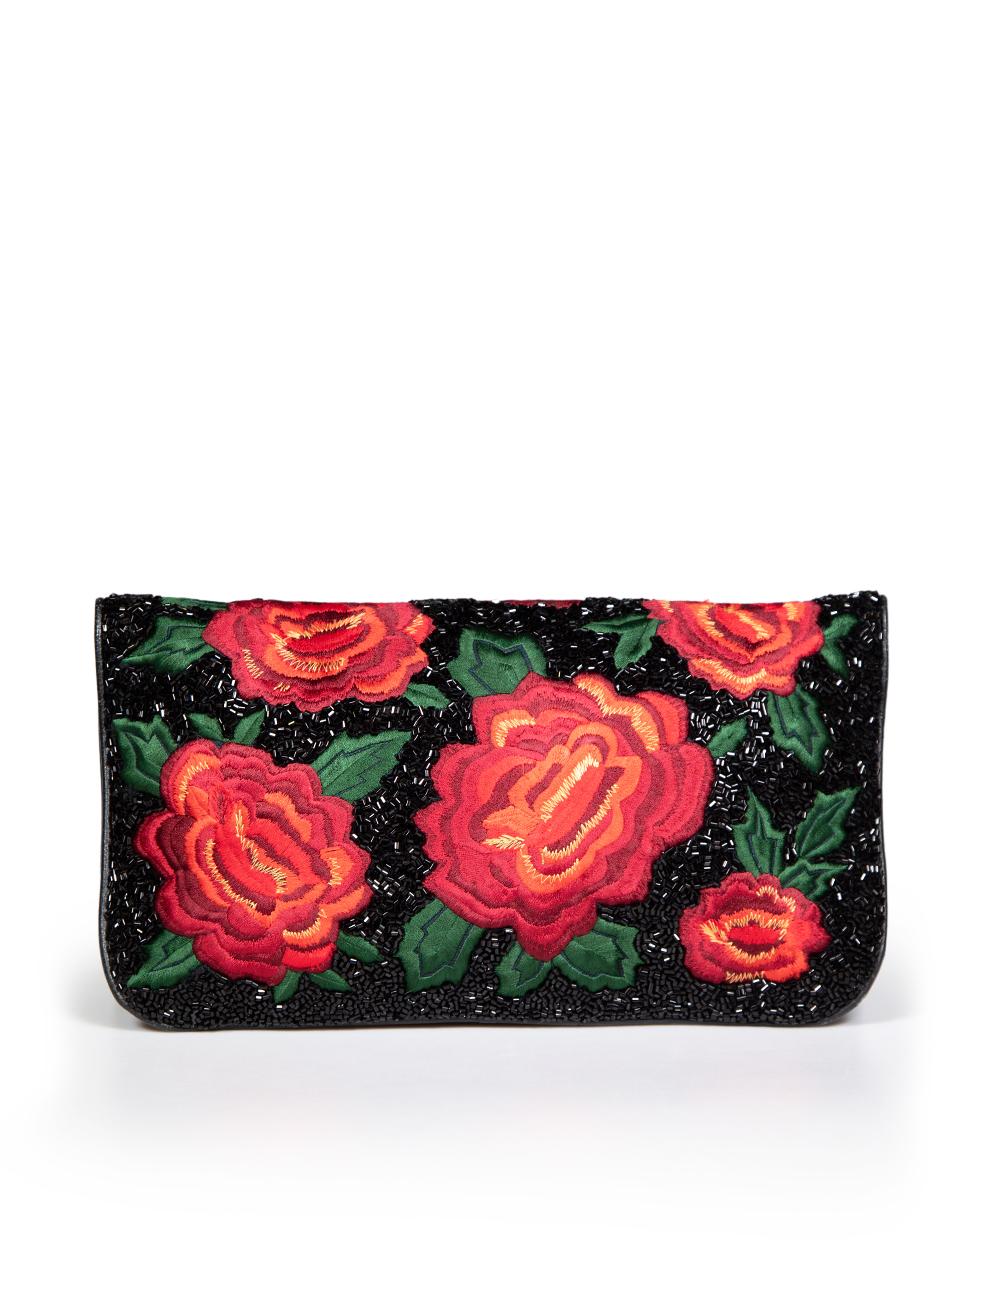 Alice + Olivia Floral Embroidered Beaded Clutch In Excellent Condition For Sale In London, GB